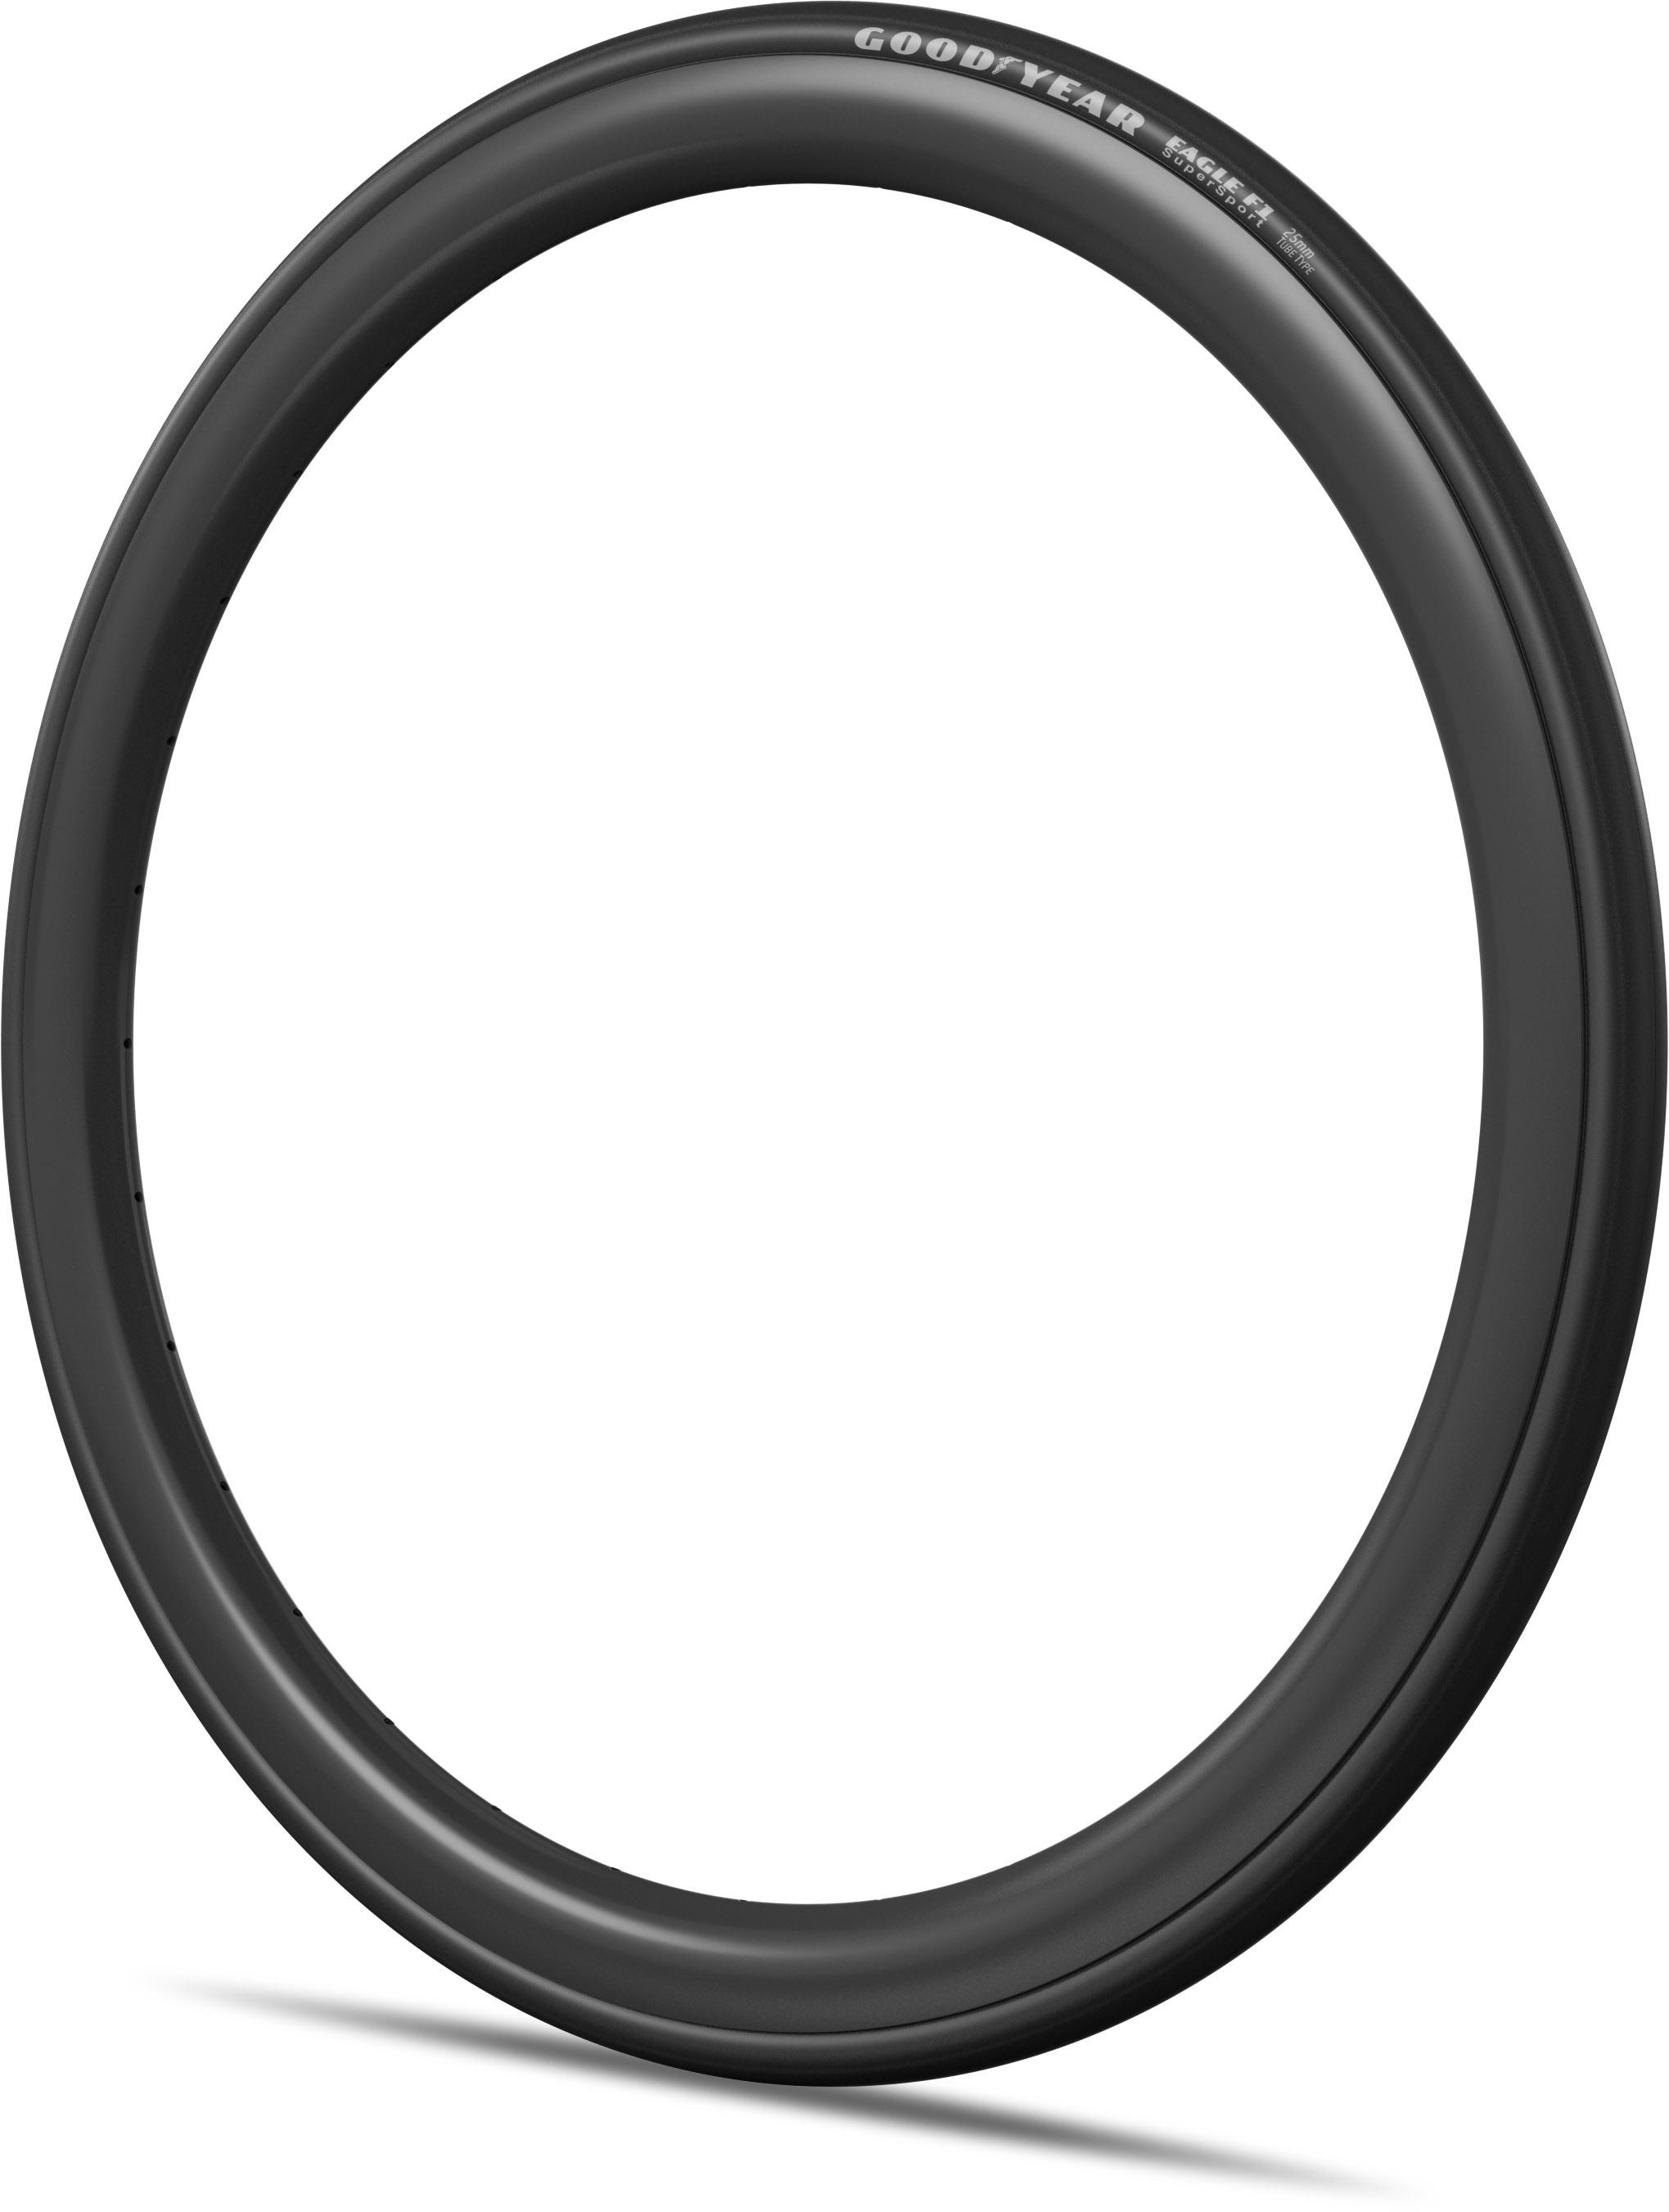 Goodyear Eagle F1 Supersport Road Tyre - Black